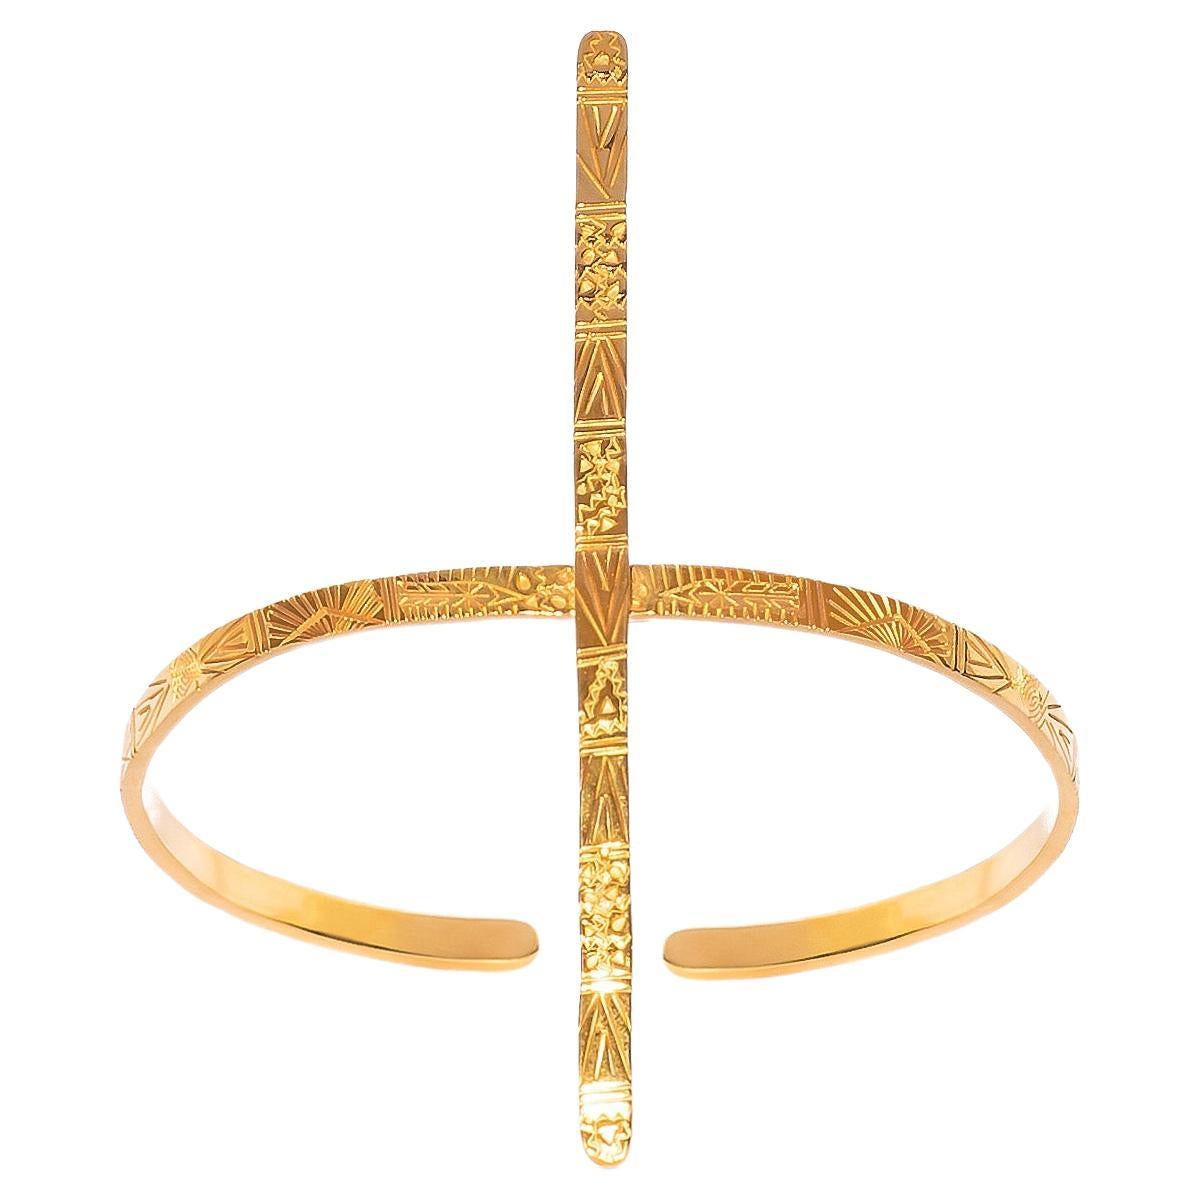 Artemisa Armlet in 14k Yellow Gold: Contemporary Ancient Egyptian Elegance For Sale